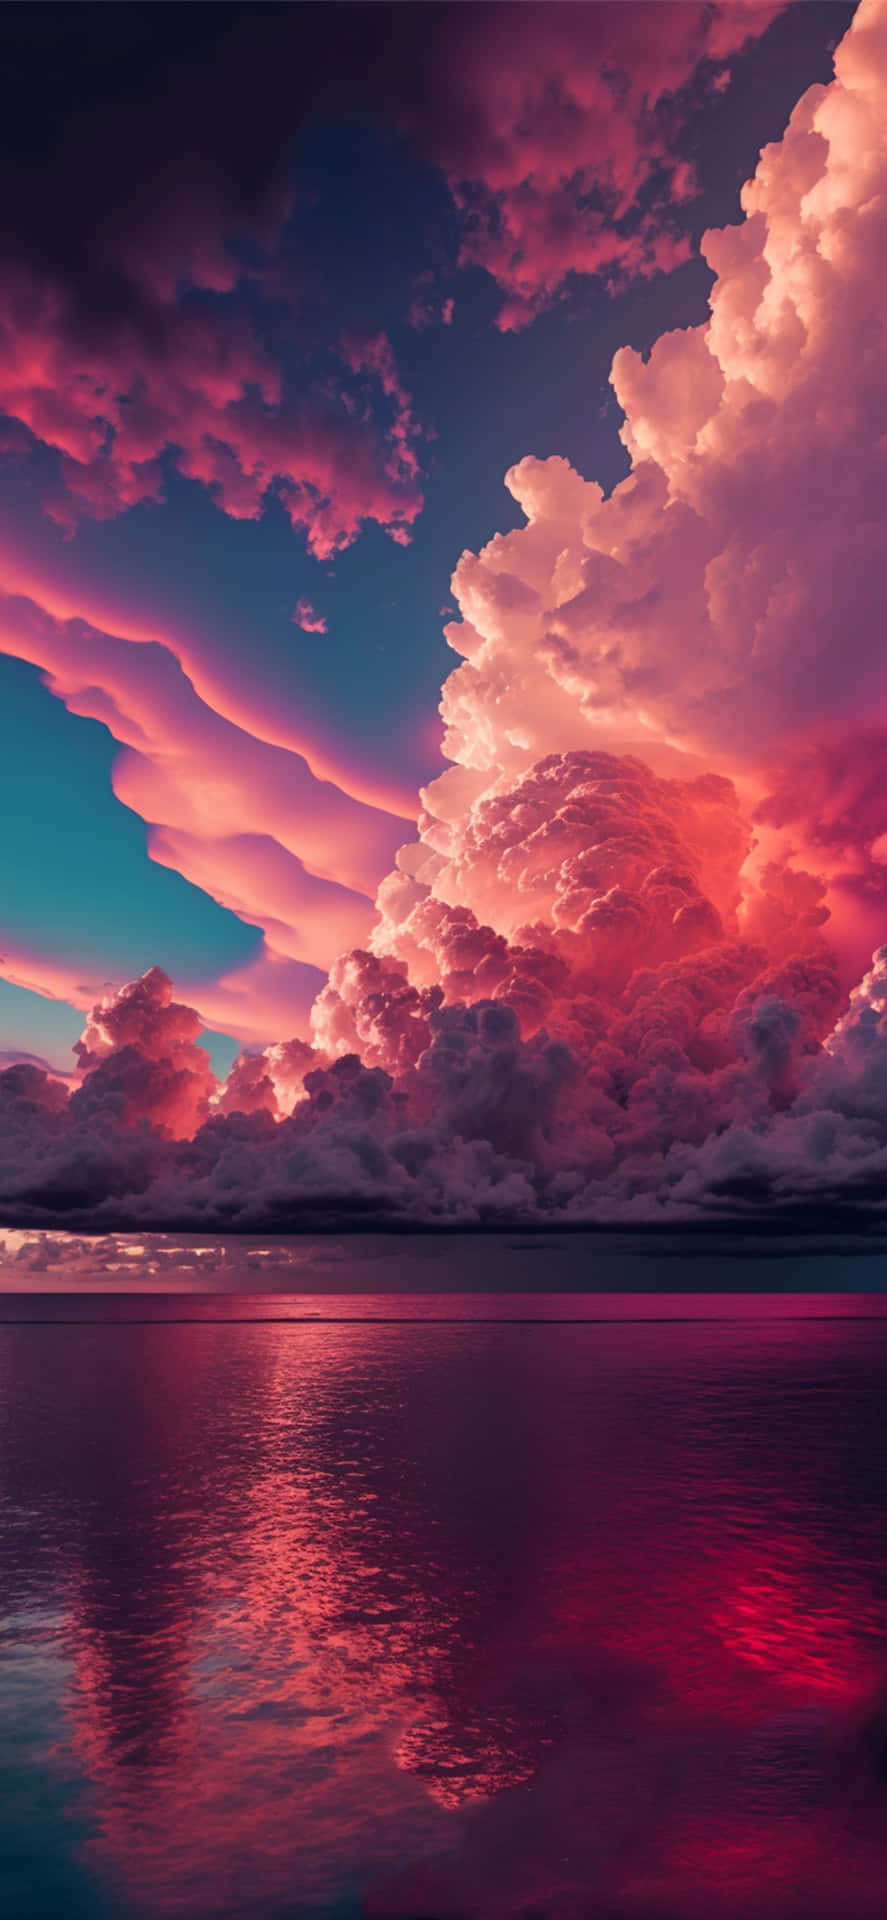 A Serene View Of Aesthetic Clouds